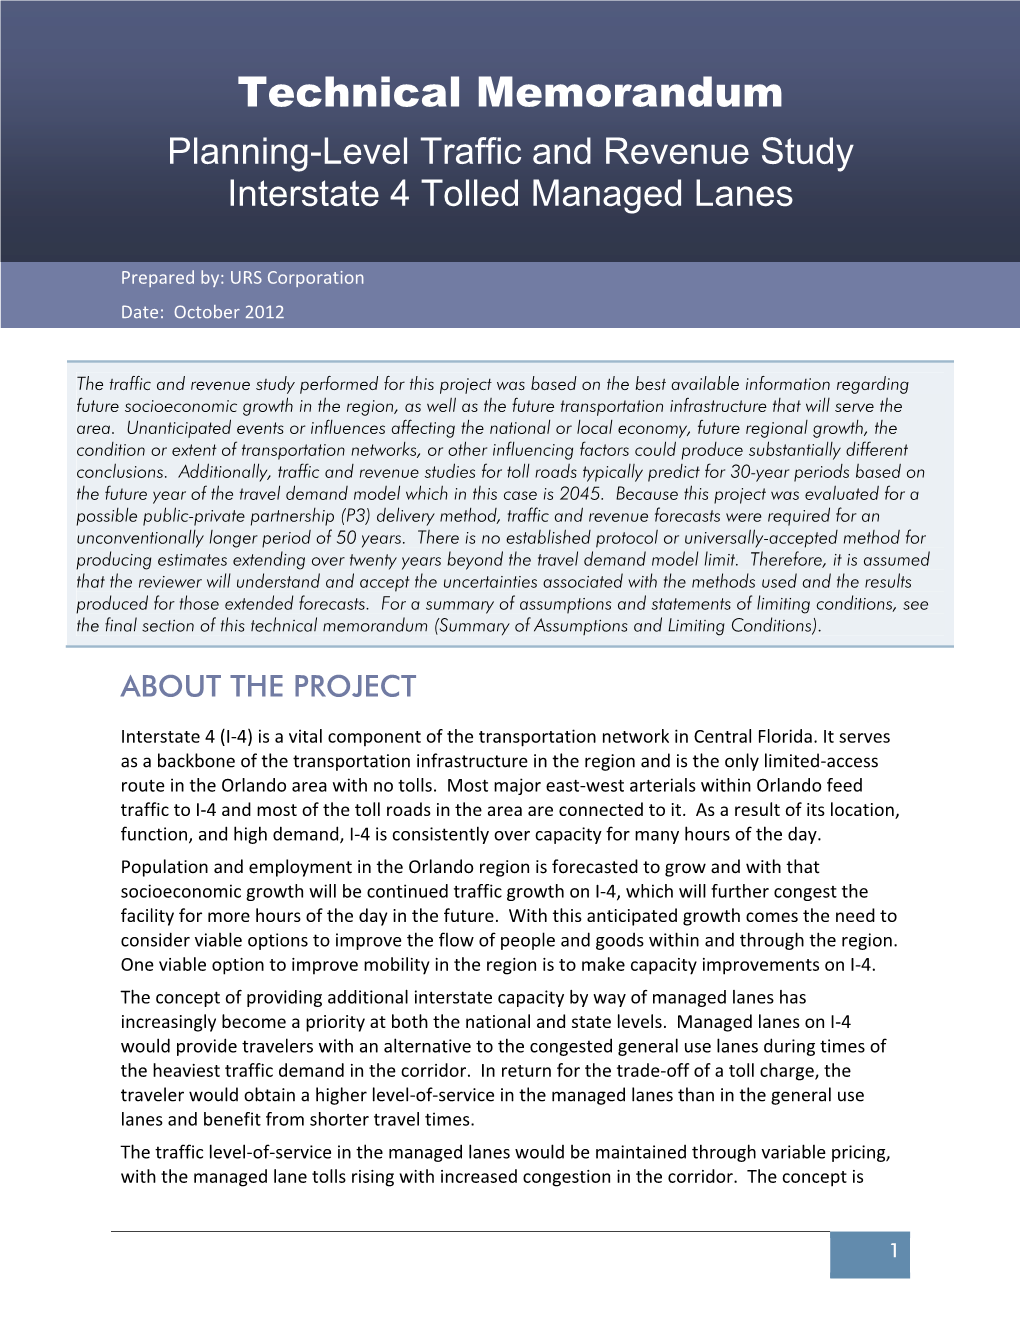 Planning-Level Traffic and Revenue Study Interstate 4 Tolled Managed Lanes